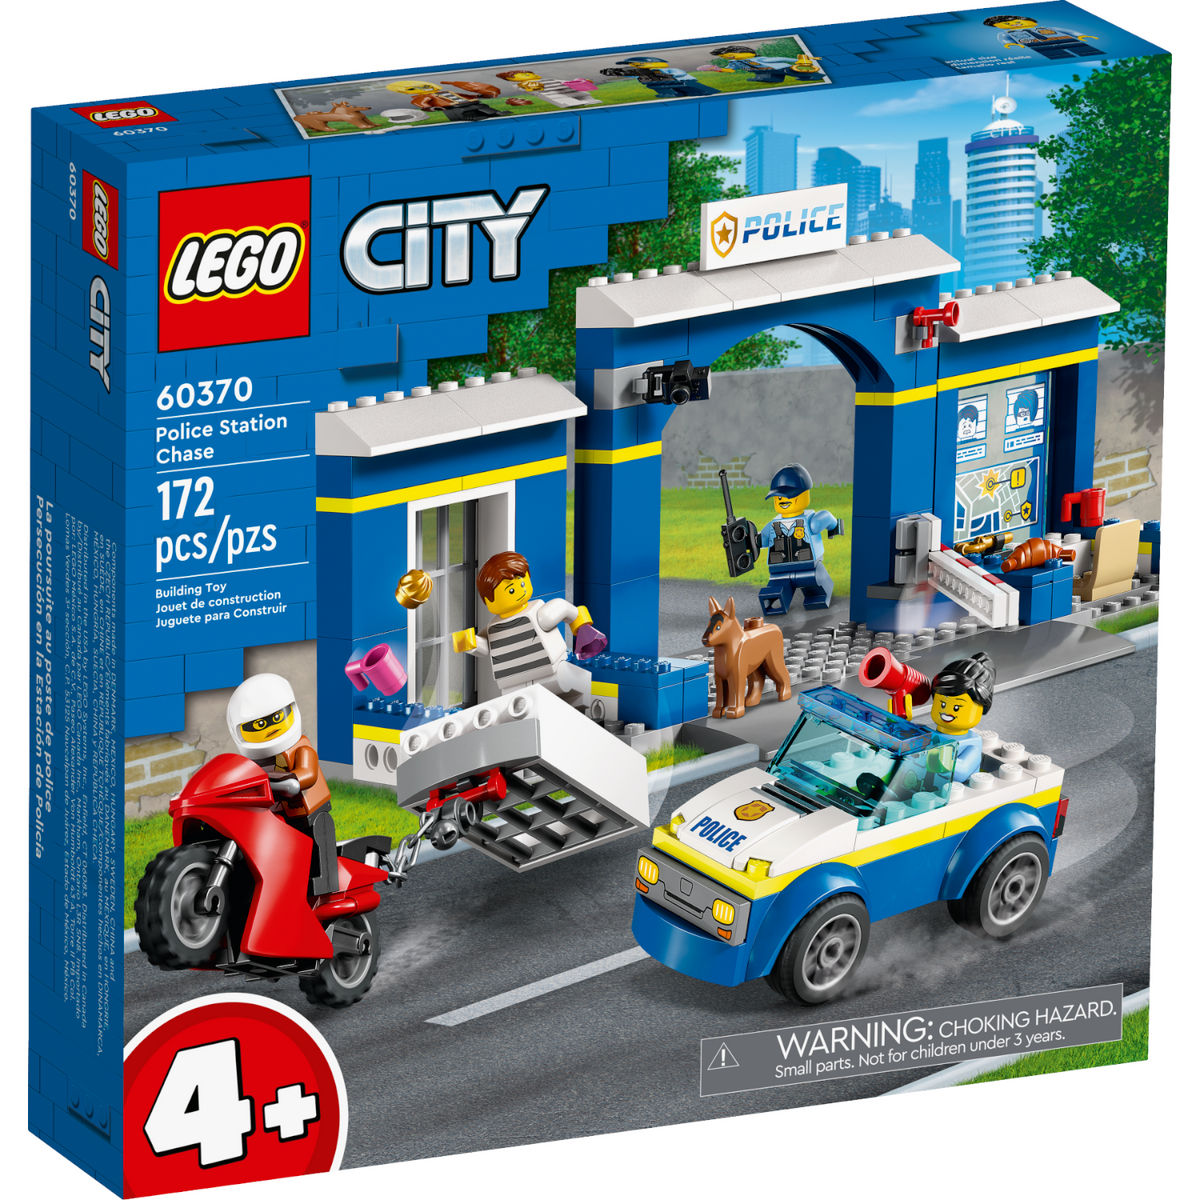  LEGO City Construction Trucks and Wrecking Ball Crane 60391  Building Toy Set for Toddler Kids Ages 4+, Includes 3 Construction  Vehicles, an Abandoned House and 3 Minifigures for Pretend Play : Toys &  Games